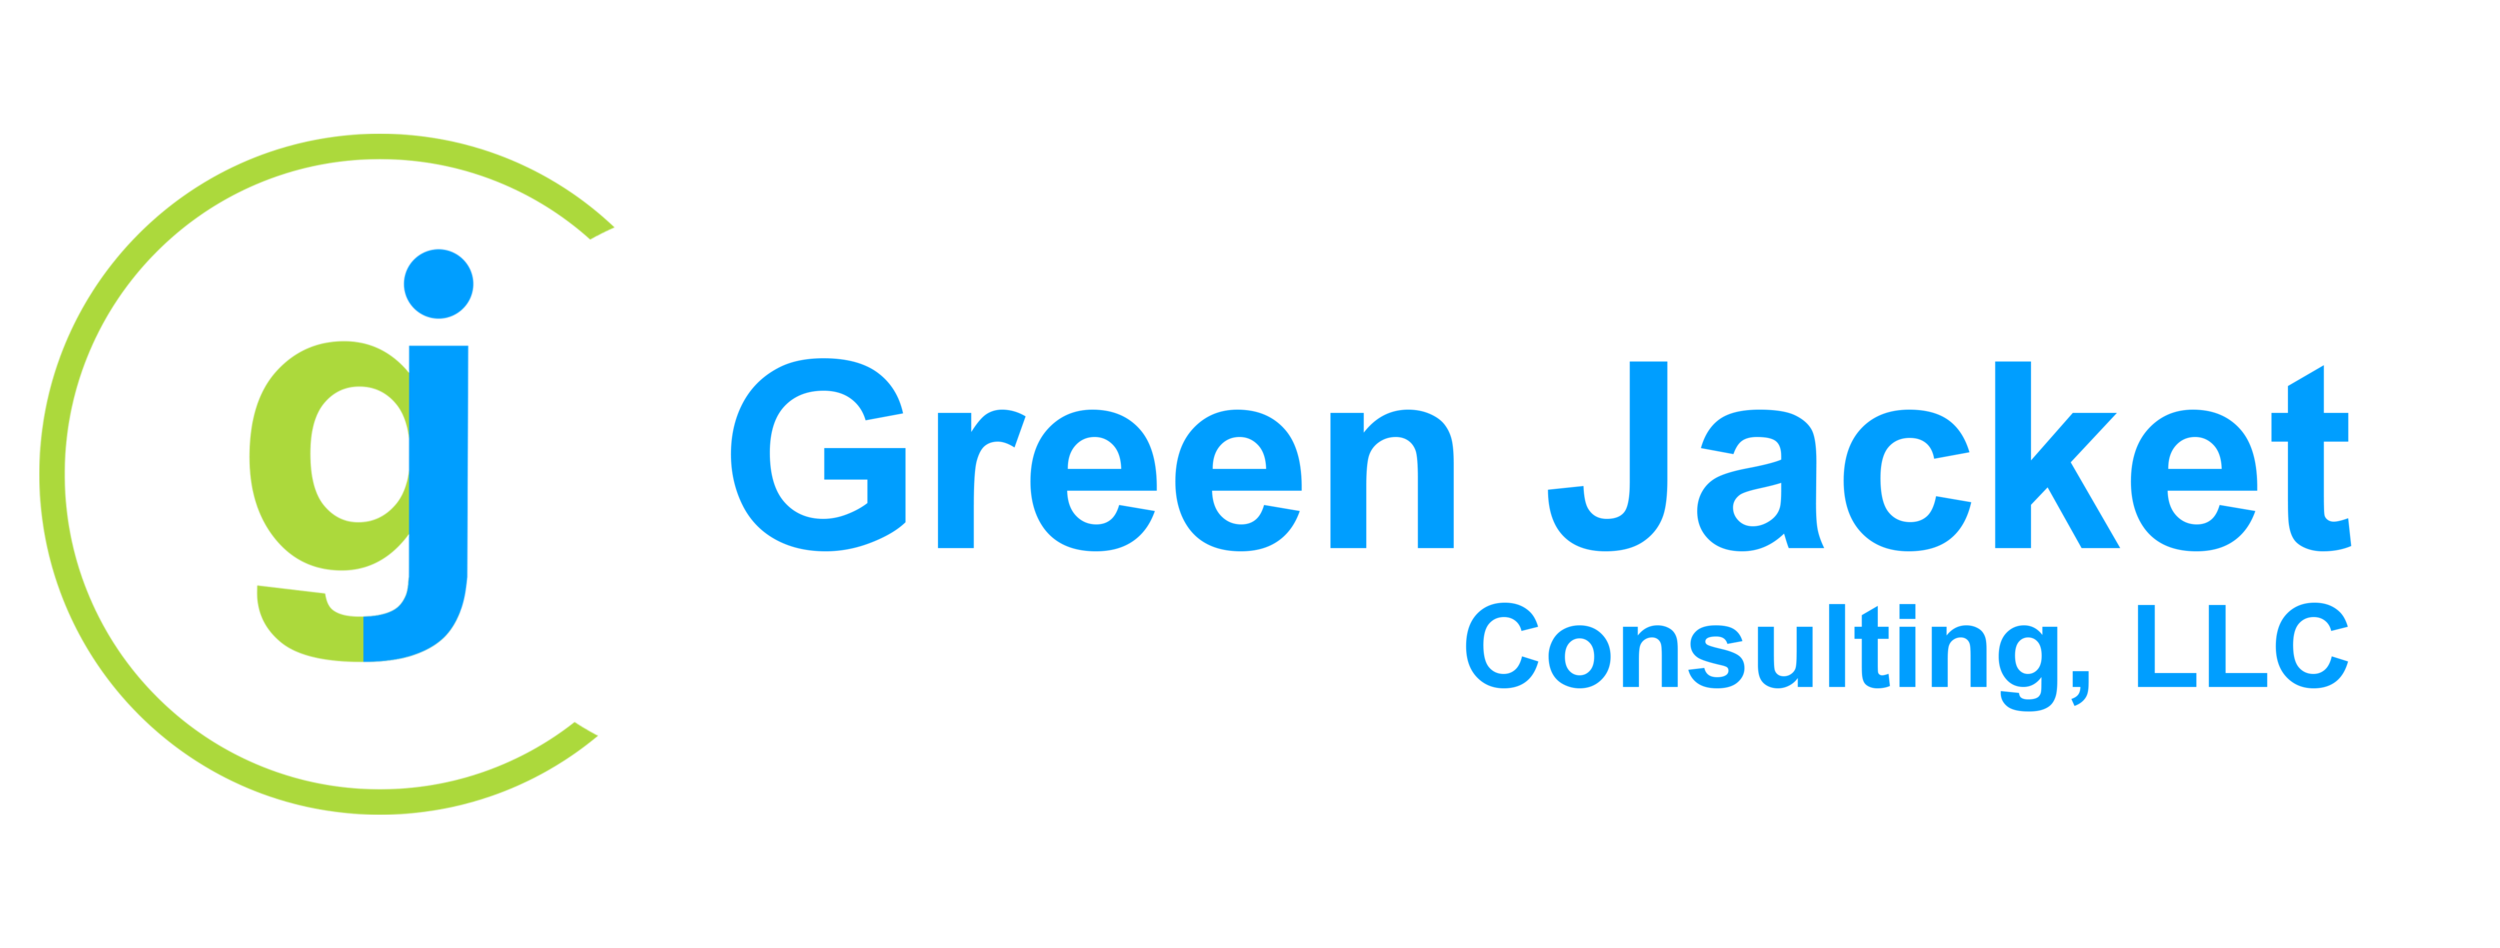 Green Jacket Consulting, LLC